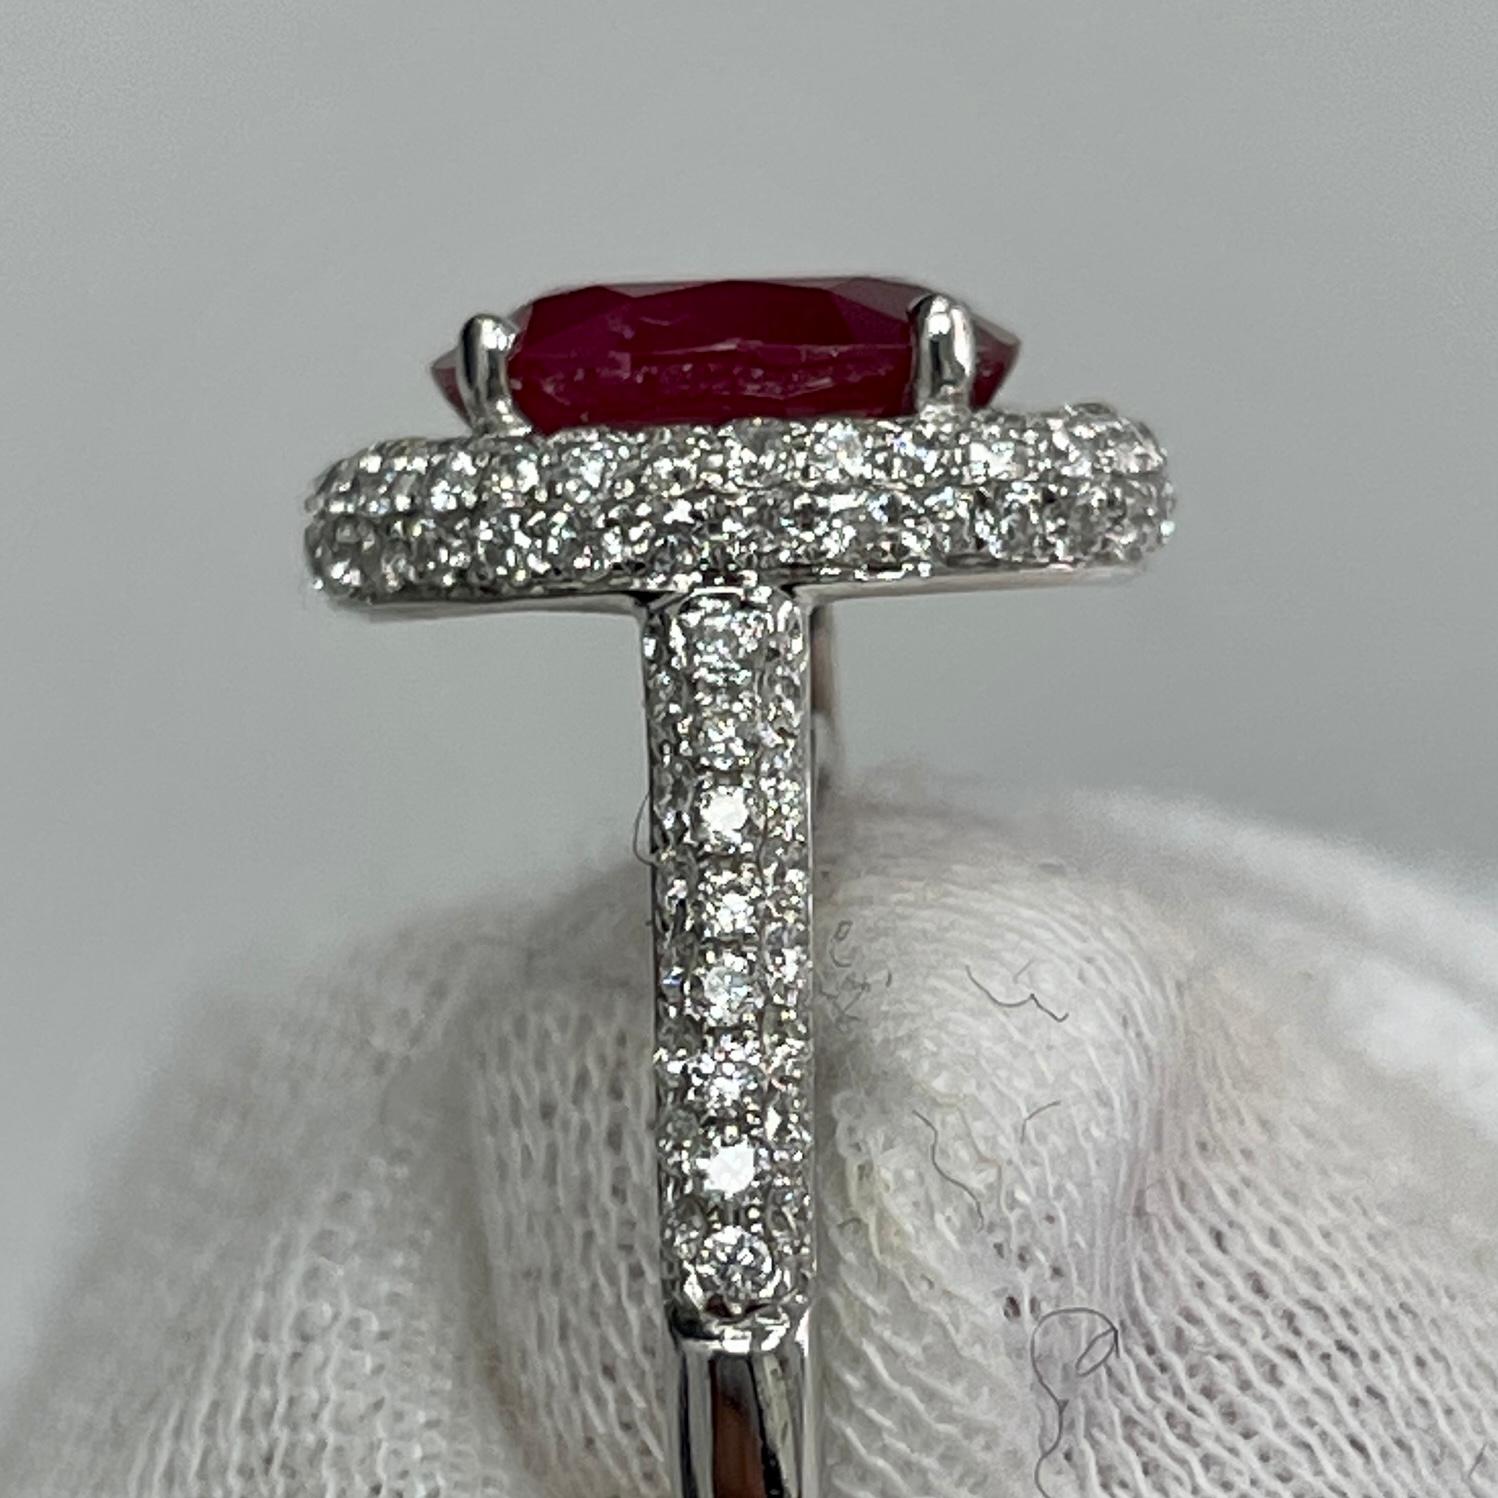 This saturated, stop sign red, no heat ruby is mounted in an elegant 18K white gold ring with 0.84 carats of brilliant white diamonds.